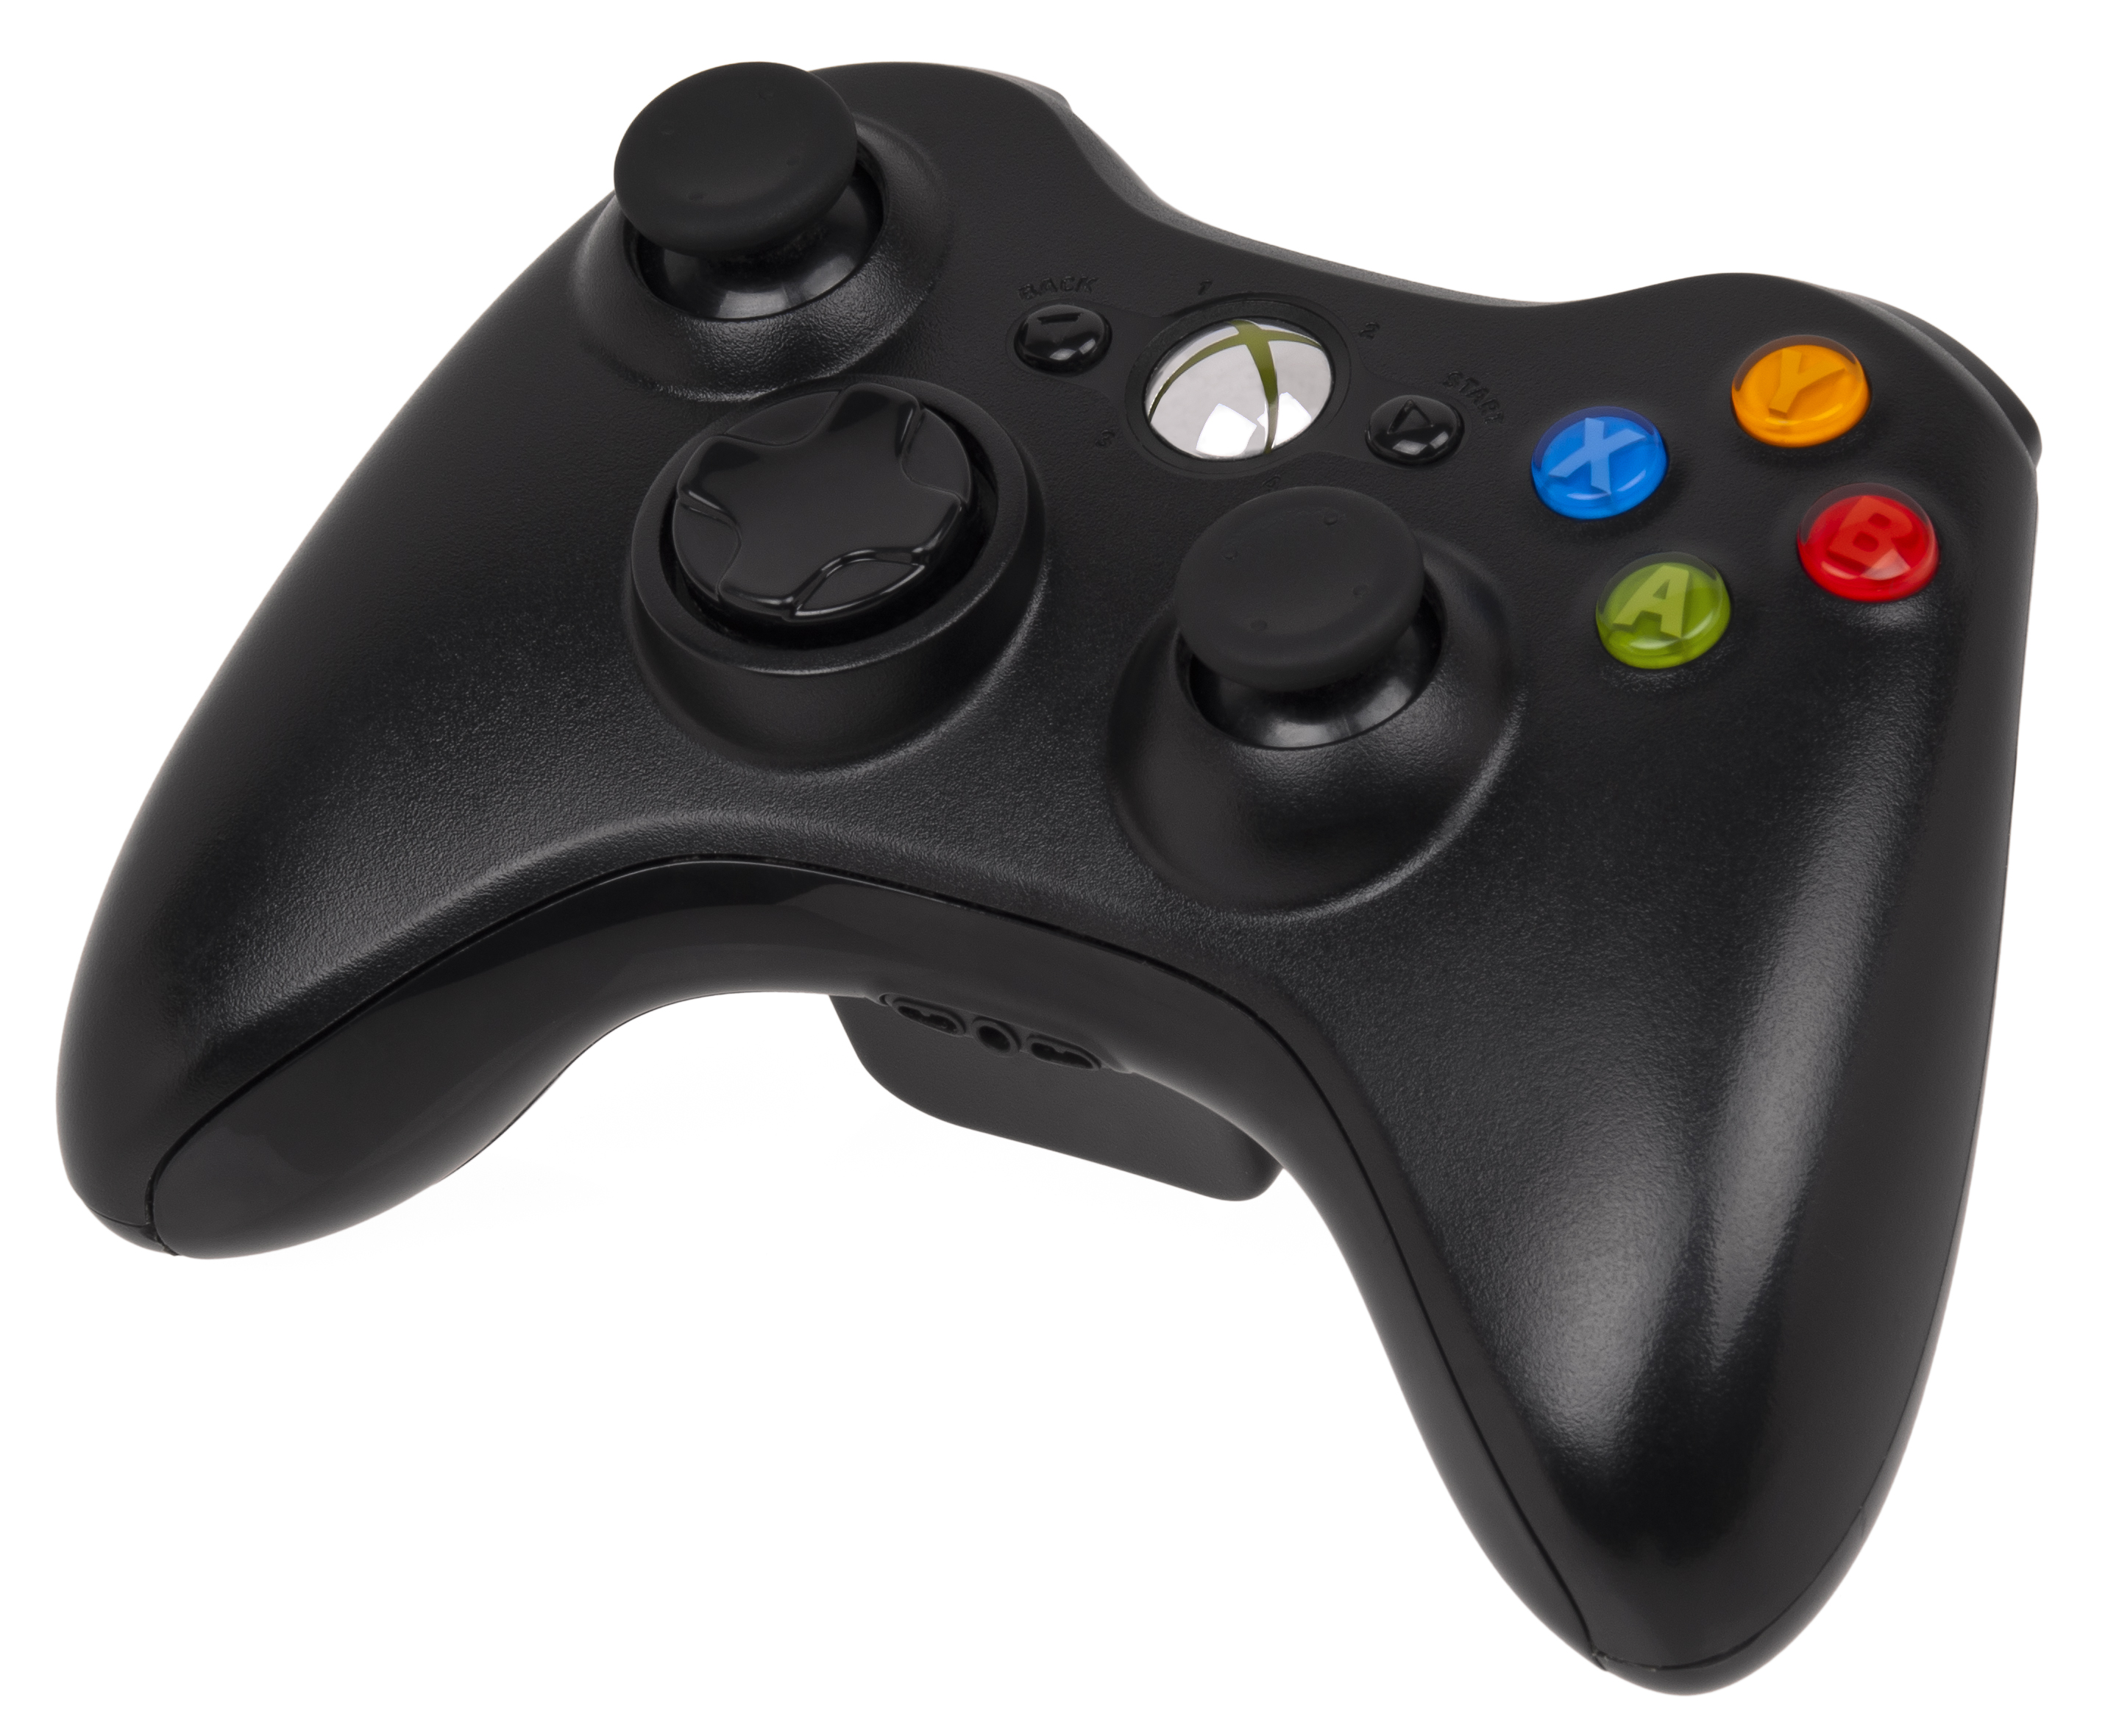 A headset or device being connected to an Xbox One controller.